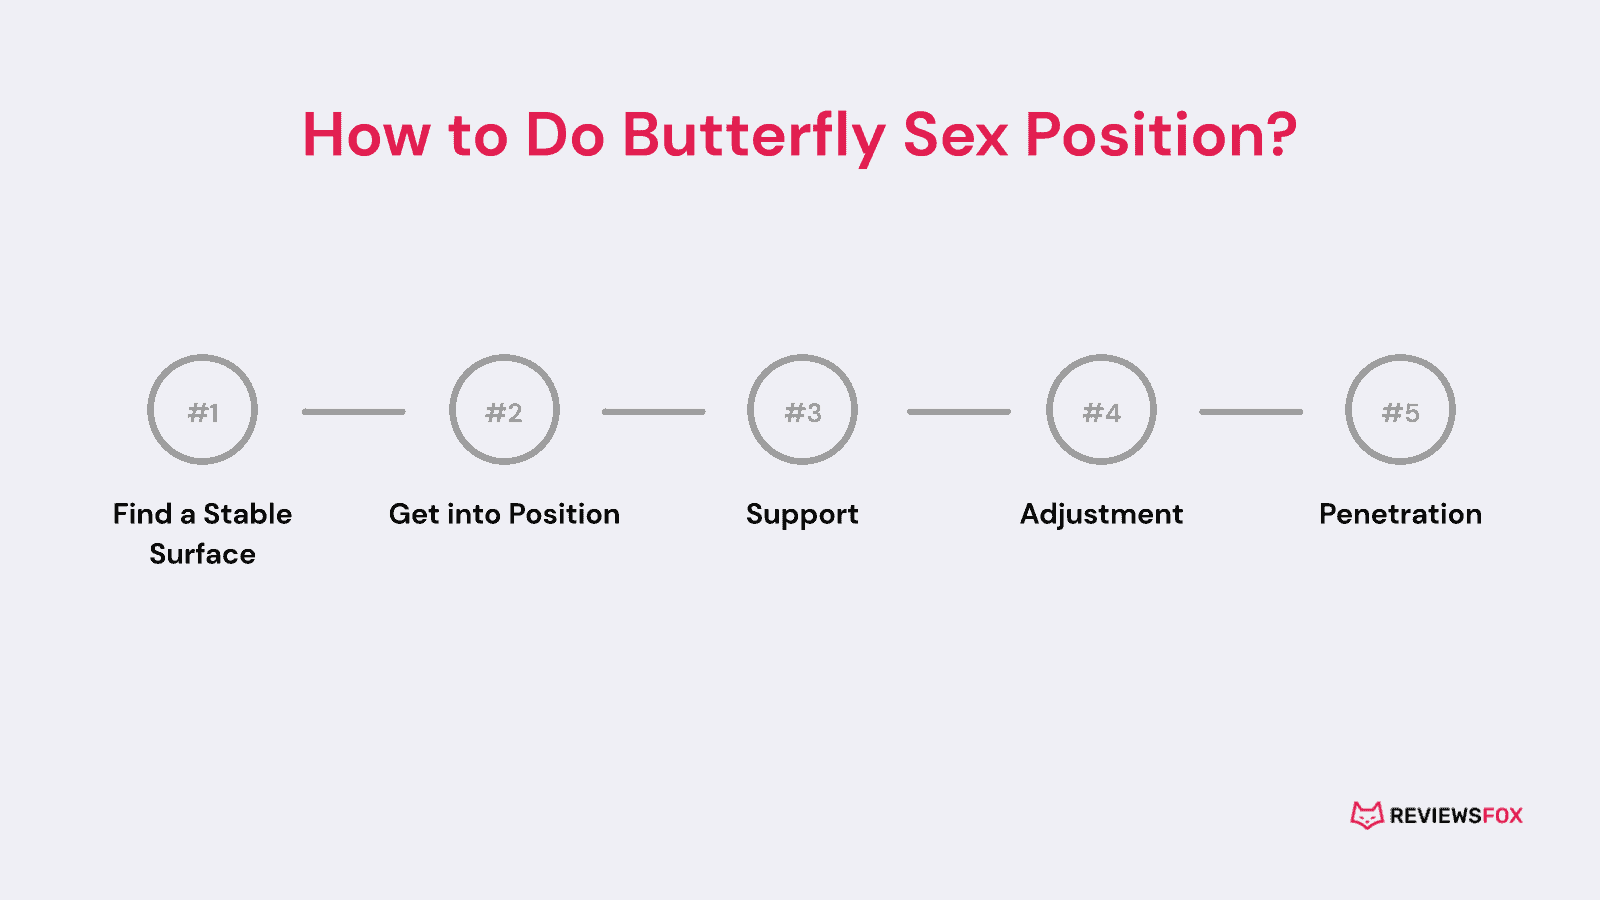 How to do Butterfly sex position